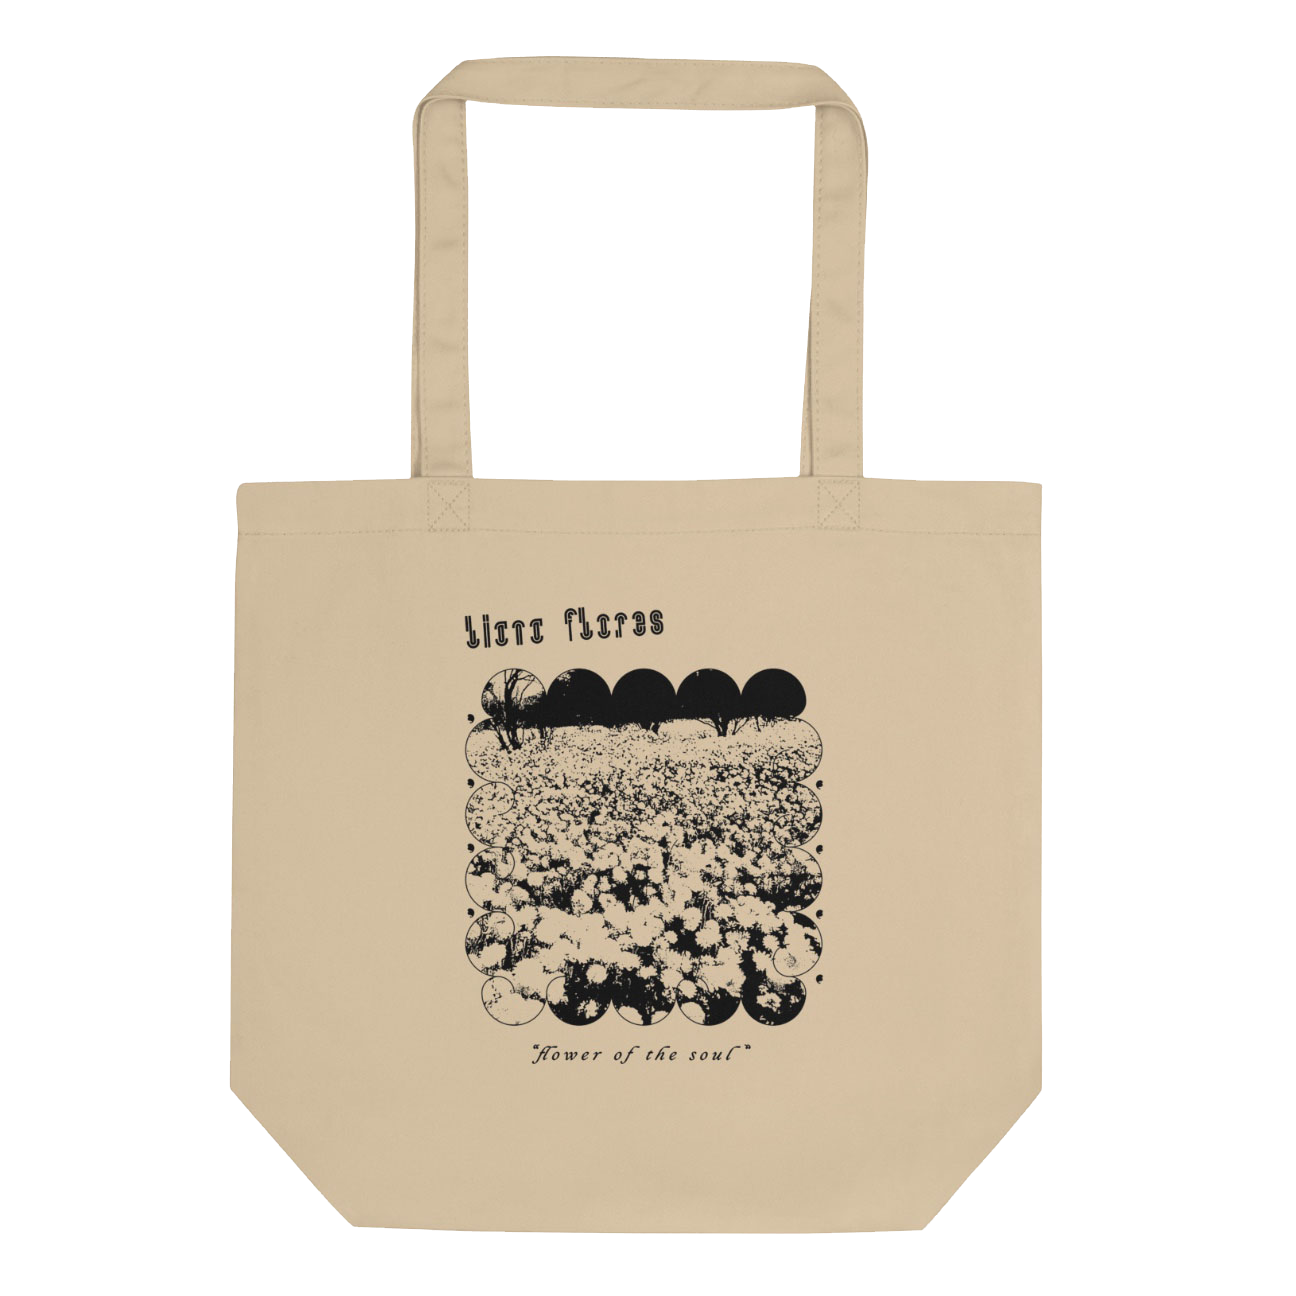 Liana Flores - Flower of the soul tote: beige